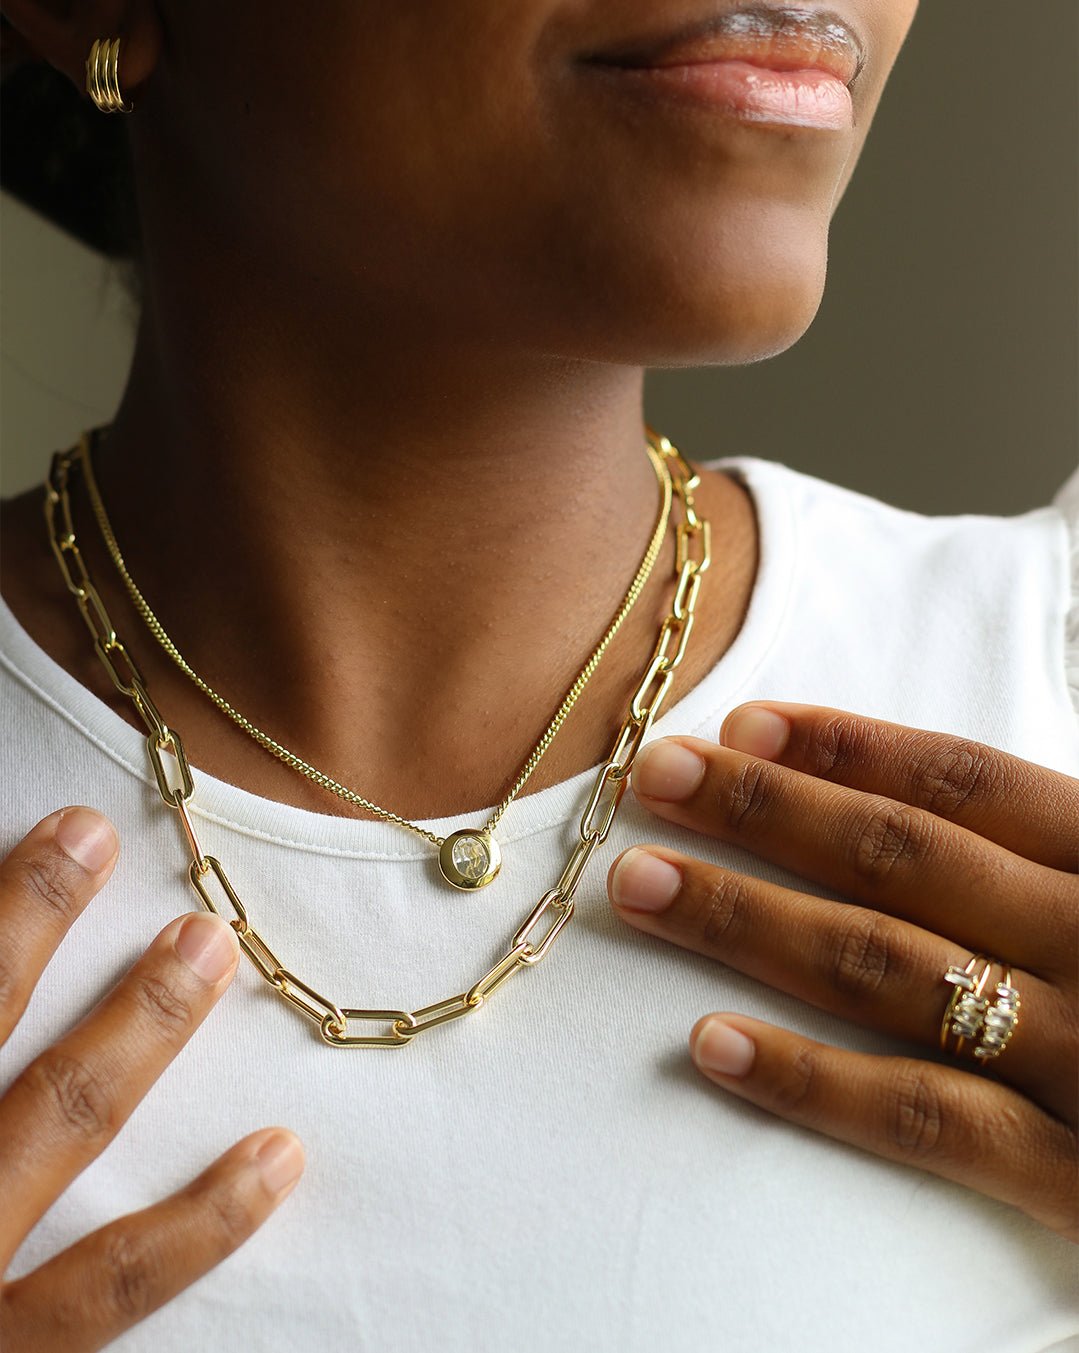 Woman wearing gold plated necklaces, earrings and rings.